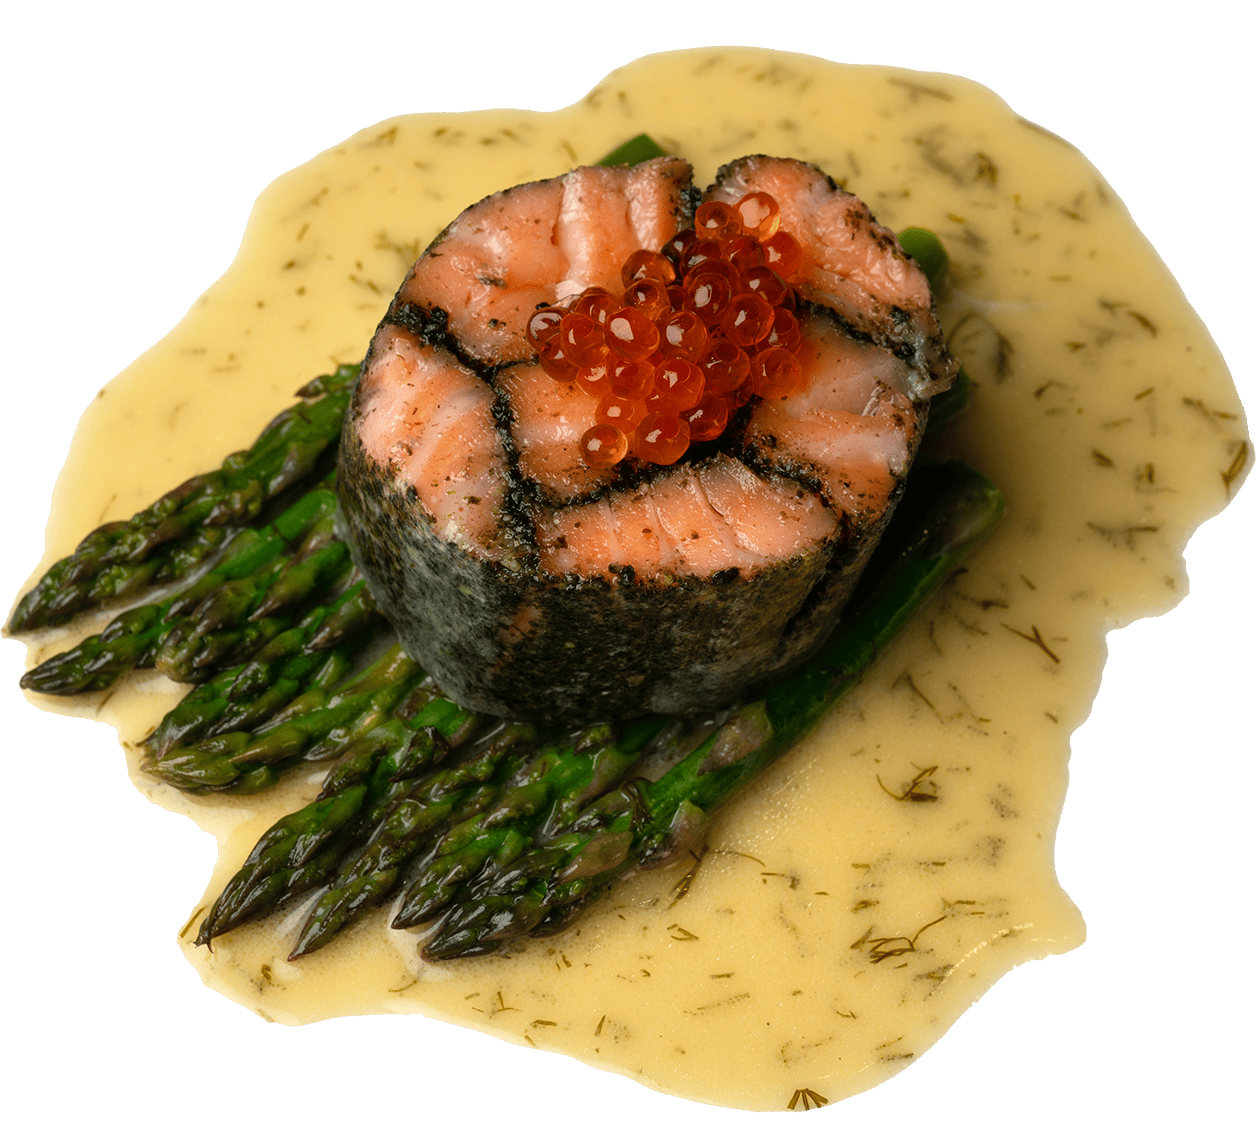 A sushi roll with caviar on asparagus, surrounded by sauce